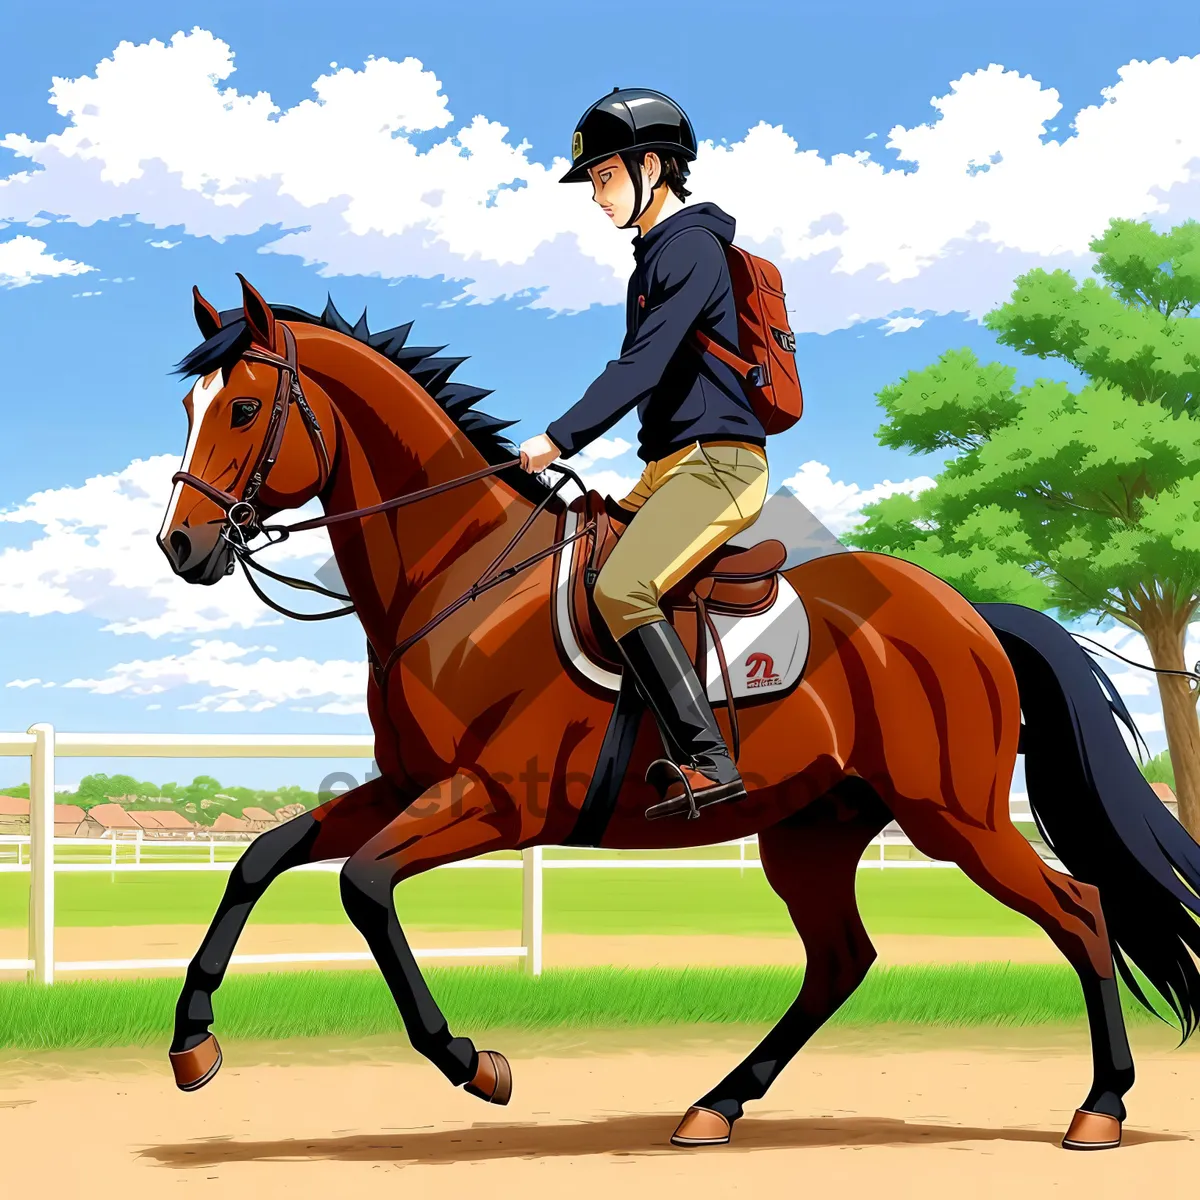 Picture of Dynamic Equestrian Action with Thoroughbred Stallion